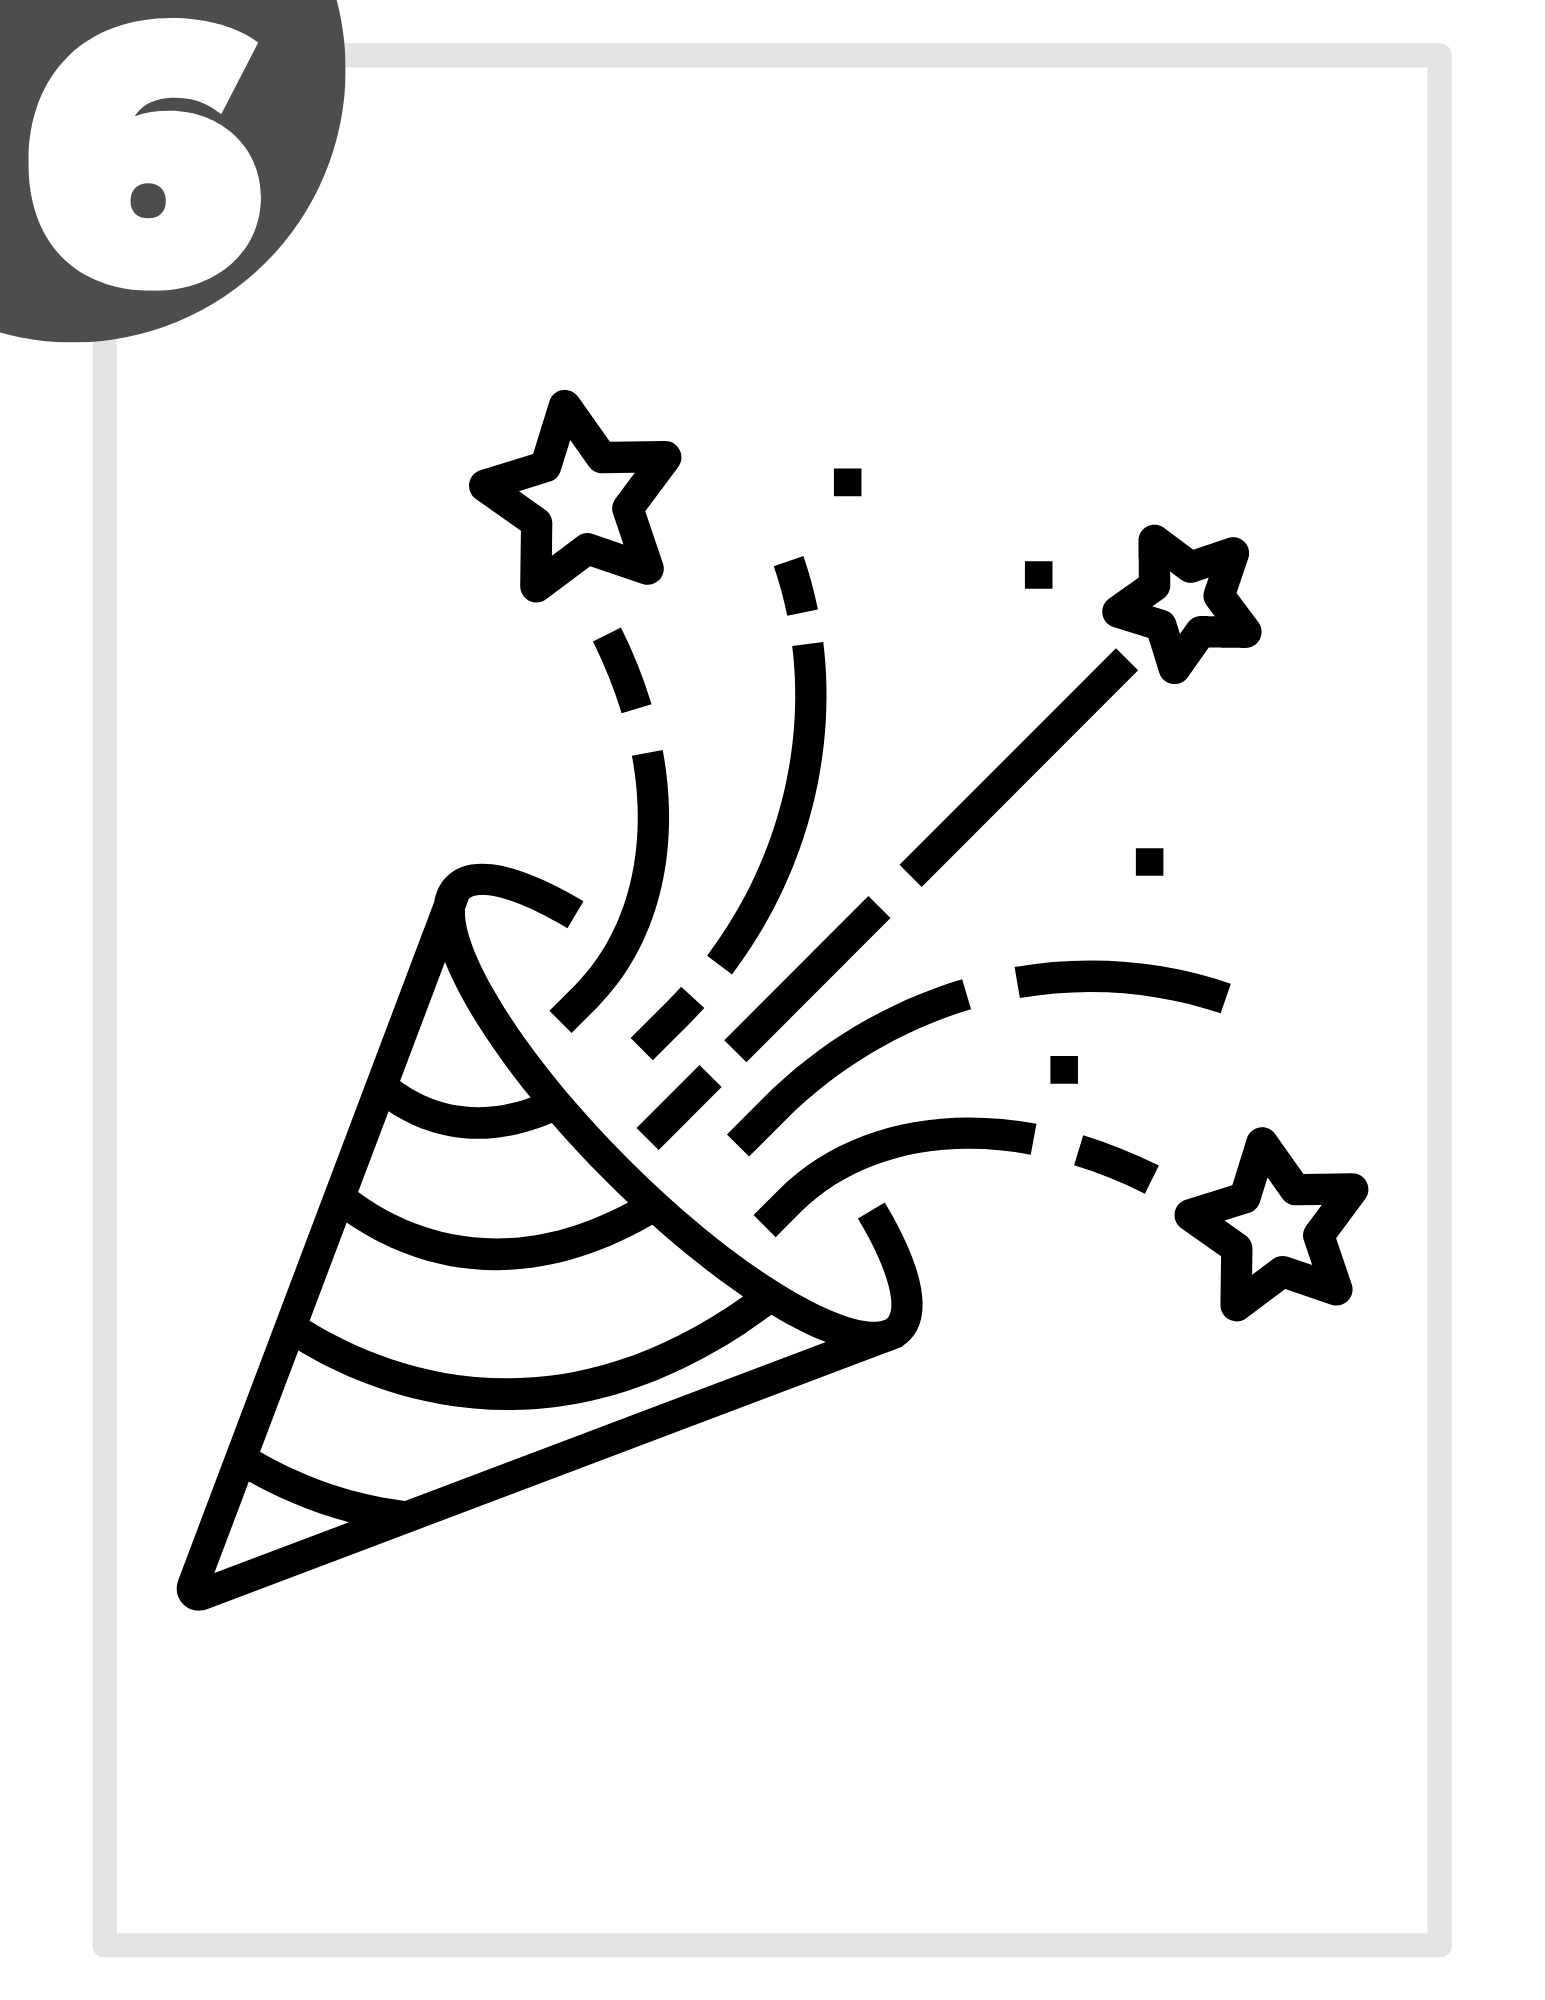 A black and white drawing of a party popper with stars coming out of it.